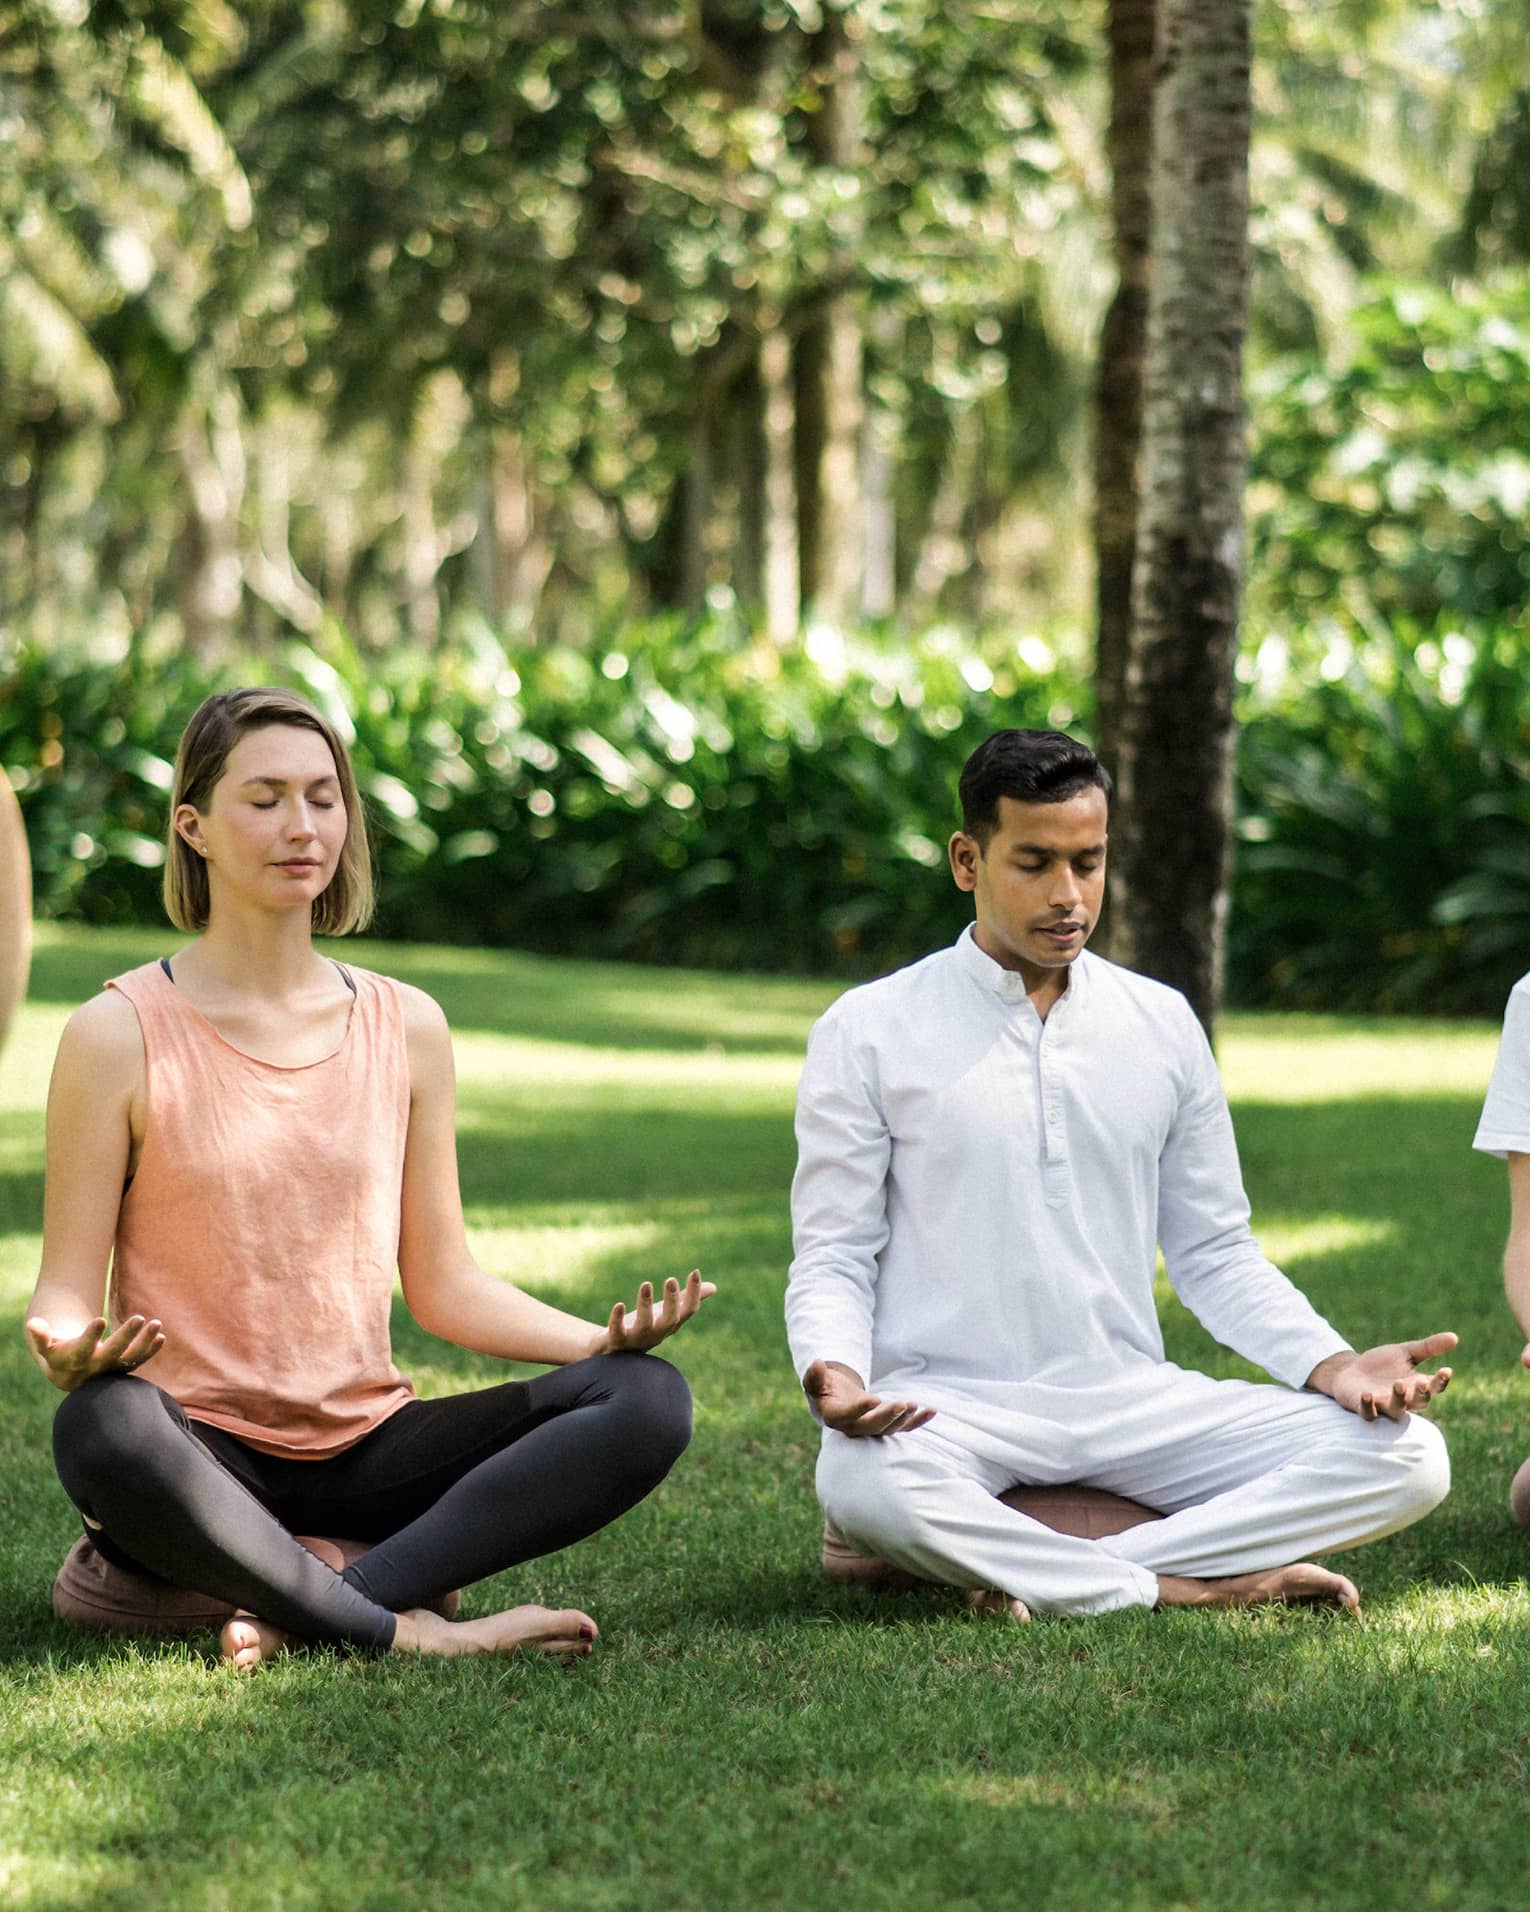 Two men and a woman practise meditation yoga outdoors on lawn